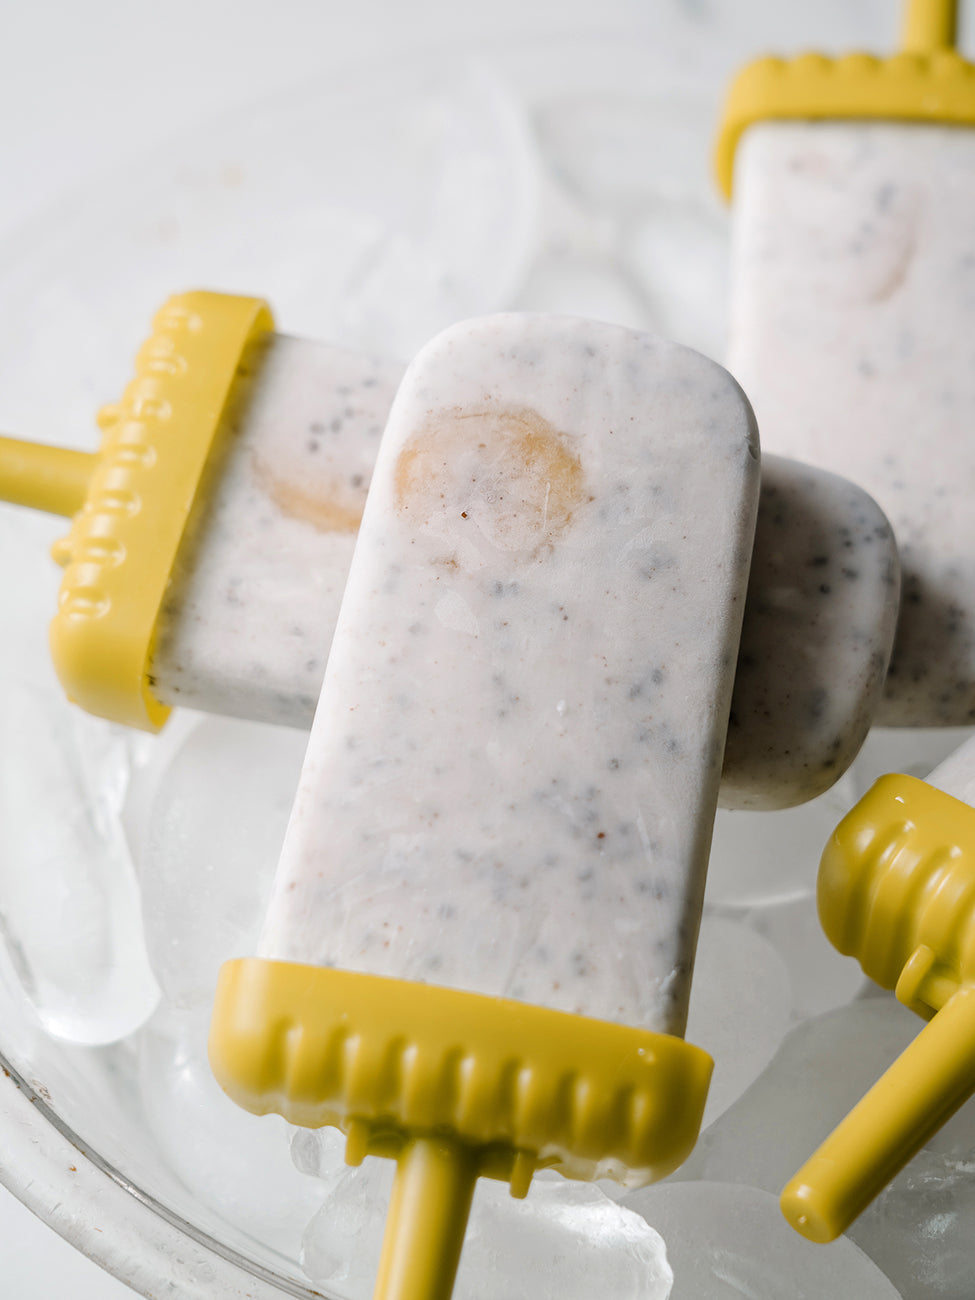 Top Tips for making Popsicles